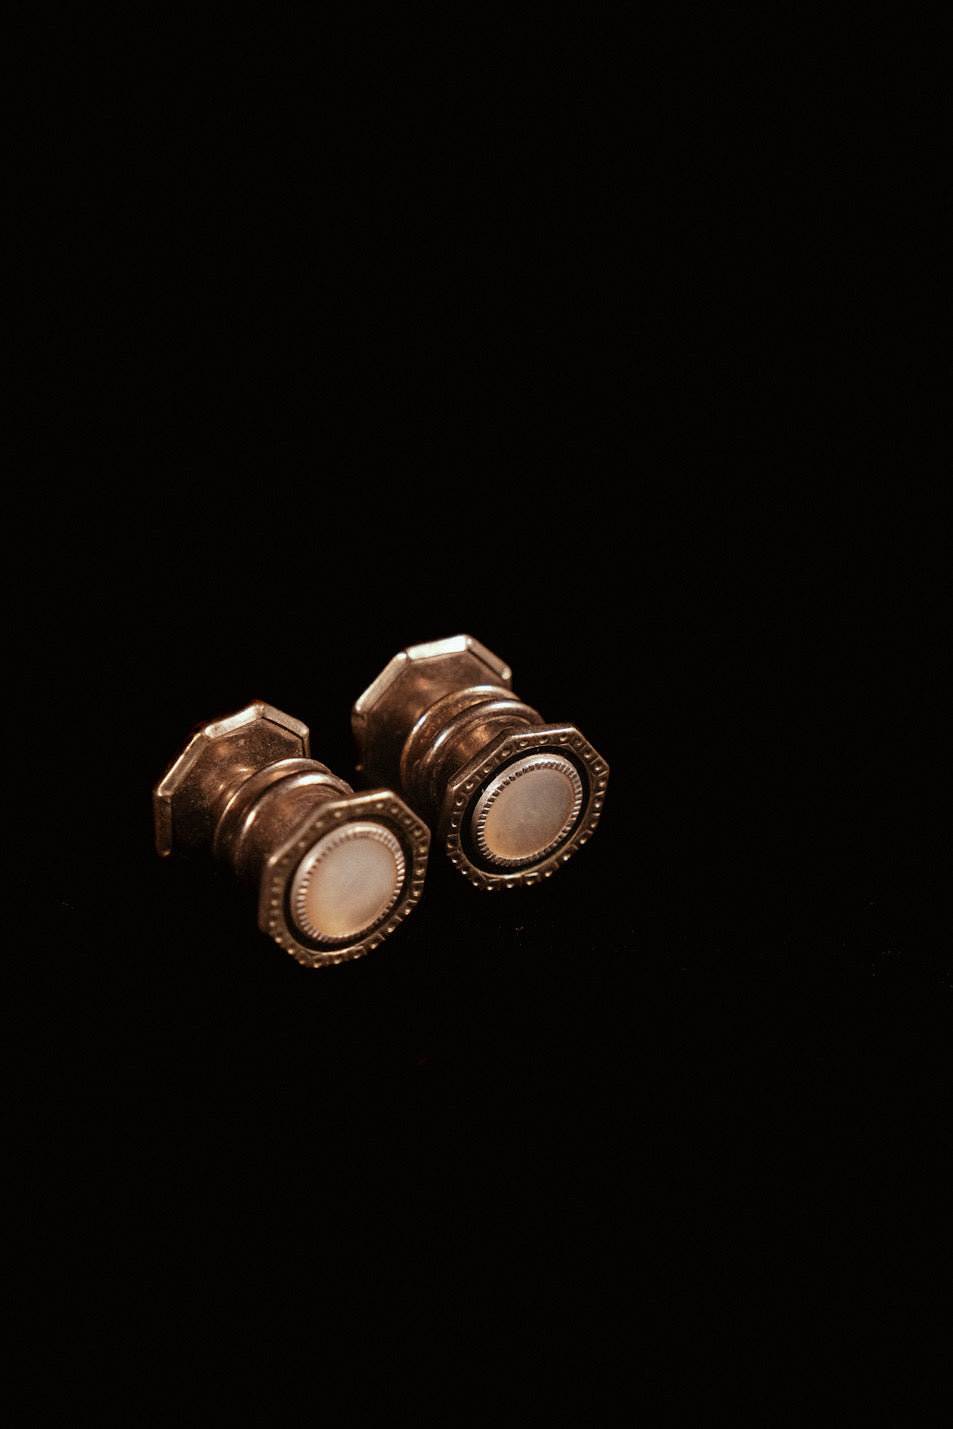 Authentic 1930s "Snap-Link" Cufflinks With Mother Of Pearl and Black Enamel Surround